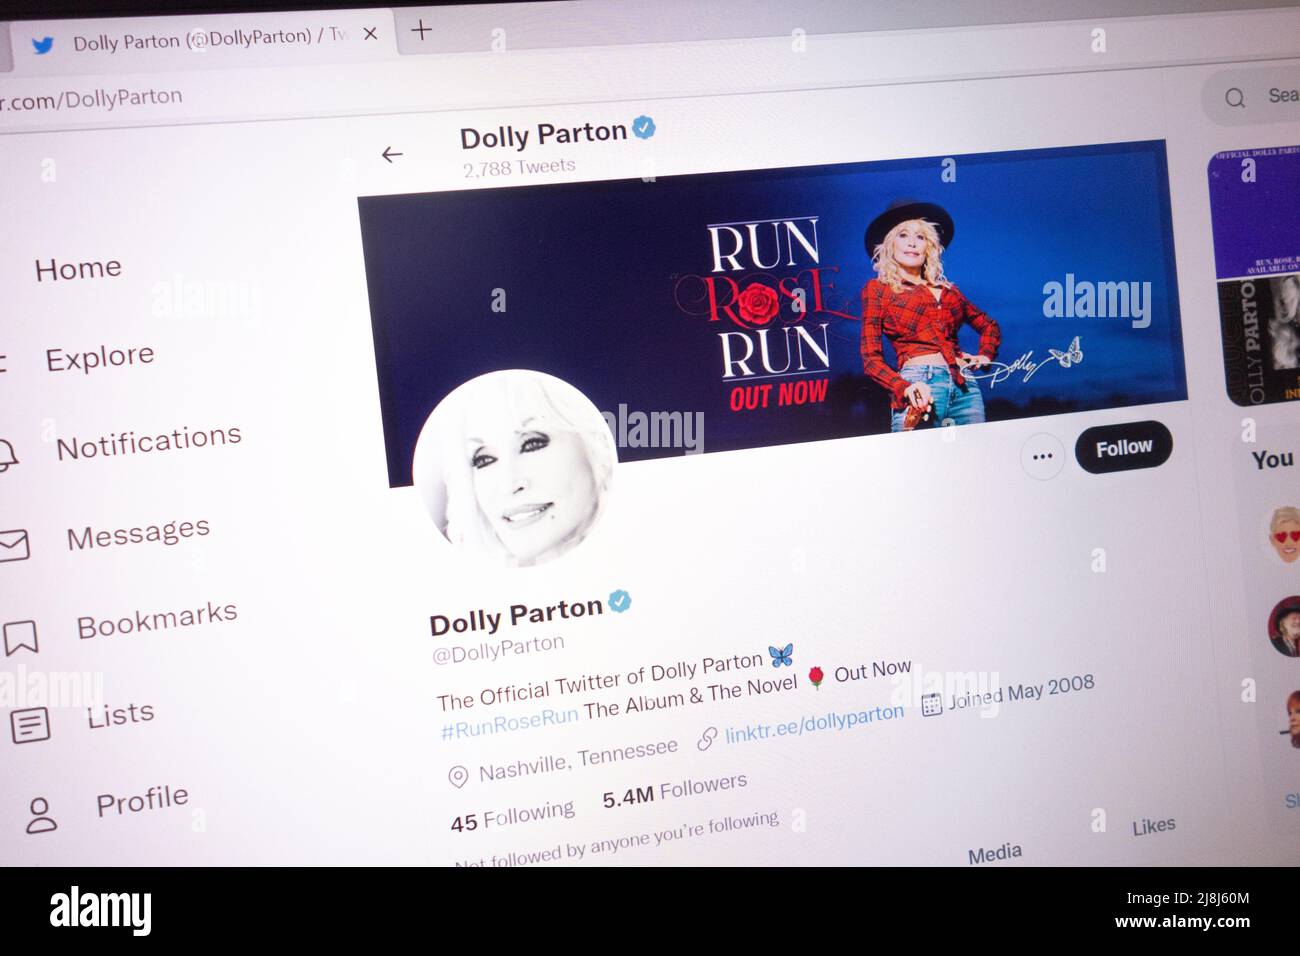 KONSKIE, POLAND - May 14, 2022: Dolly Parton official Twitter account displayed on laptop screen Stock Photo